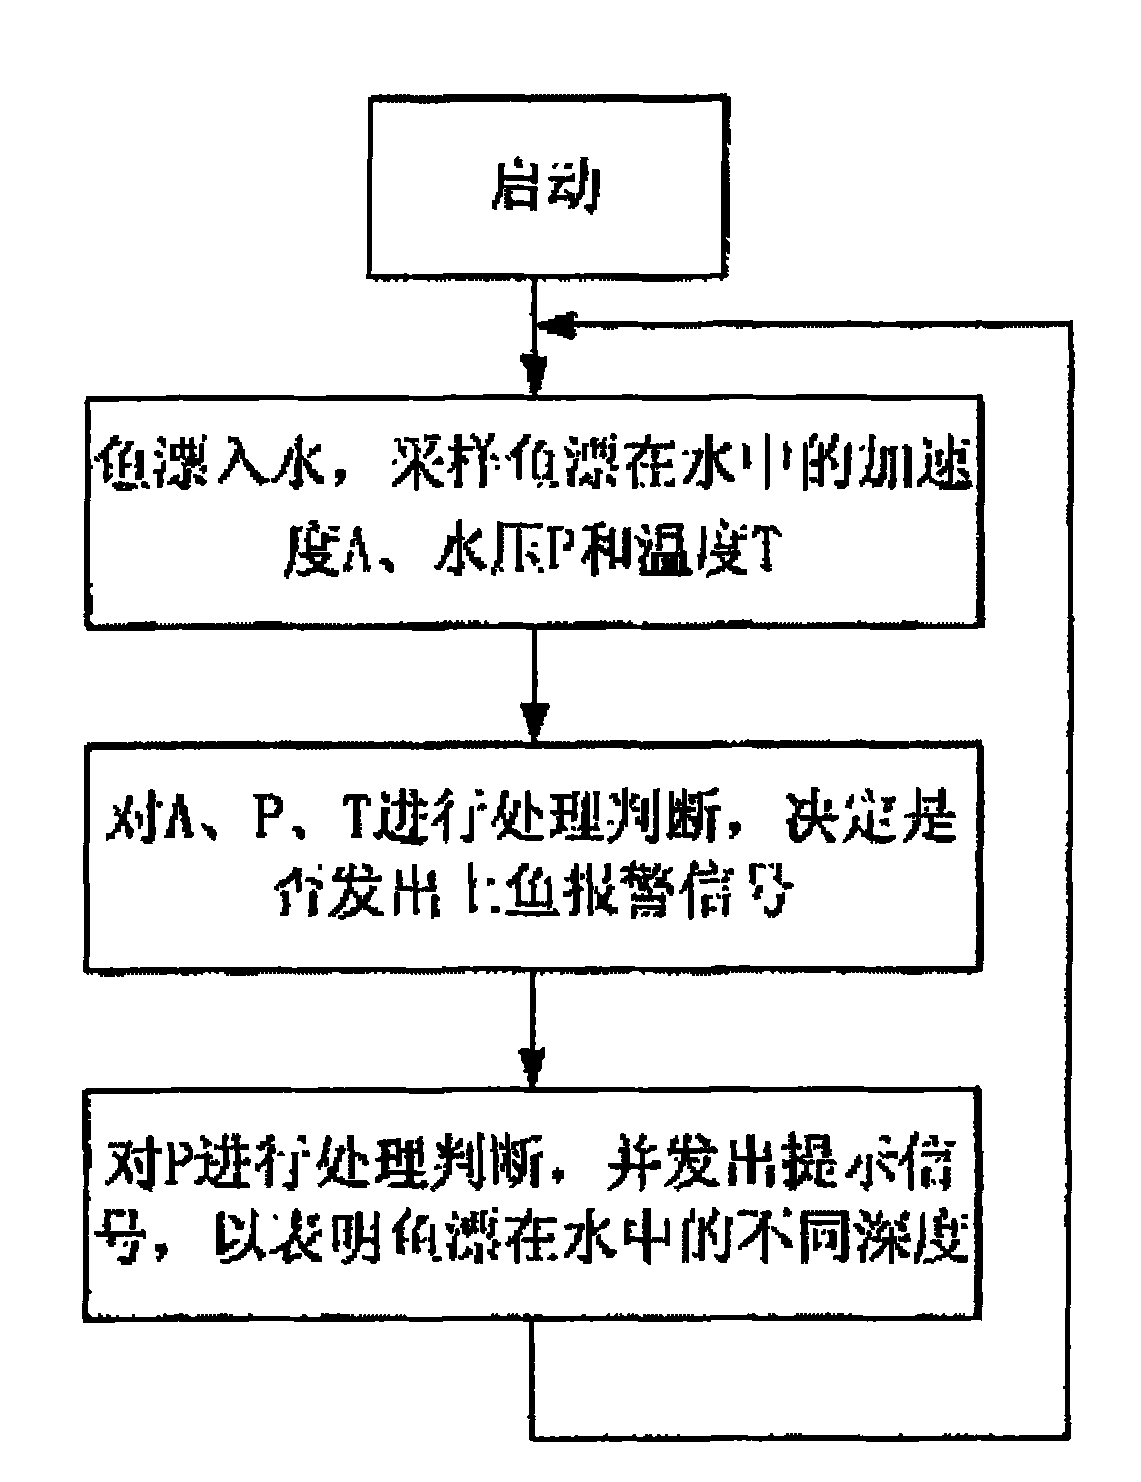 Multifunctional electronic float and implementation method thereof